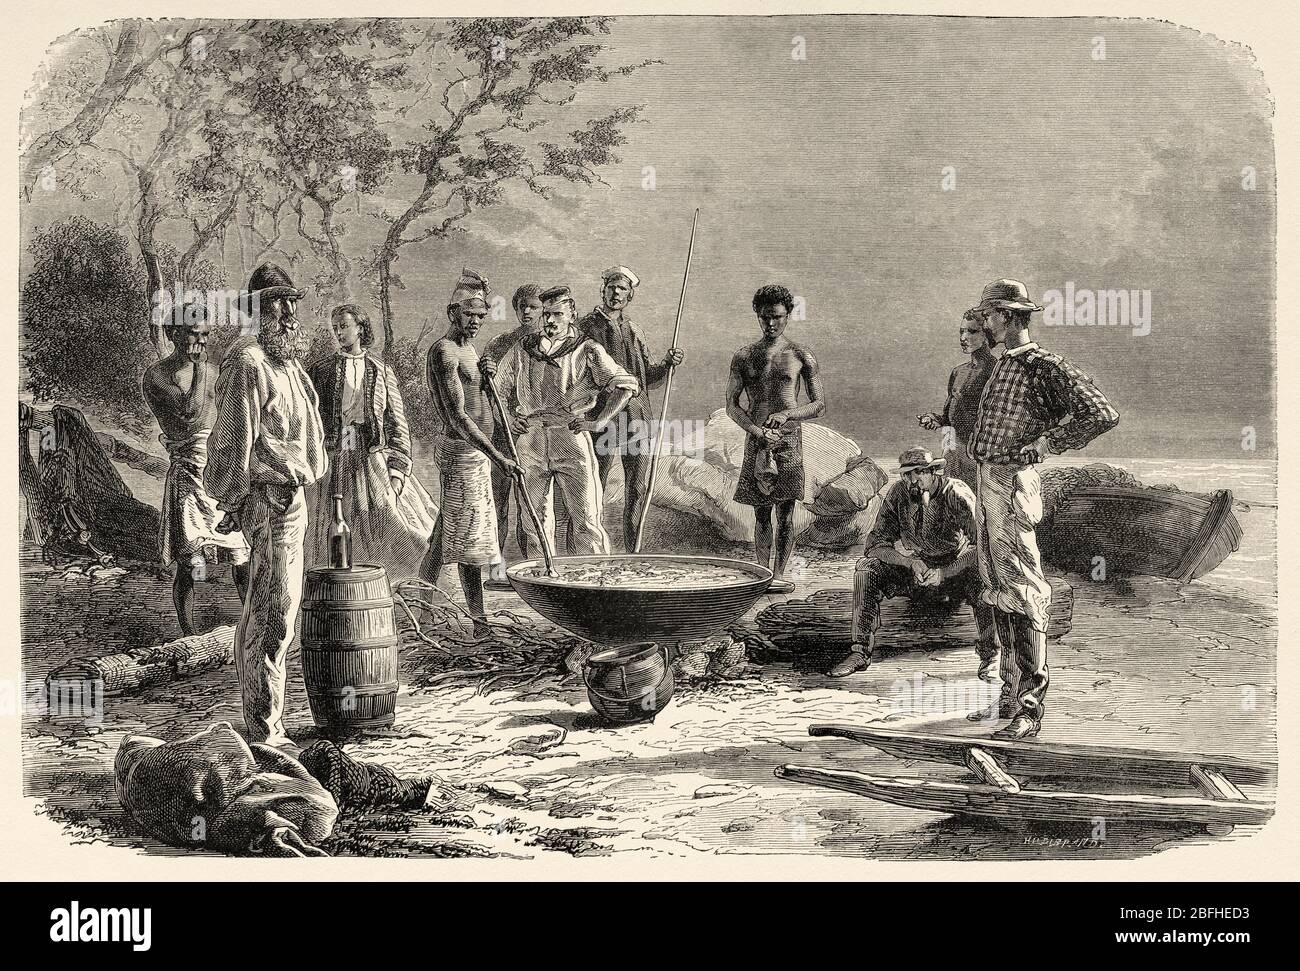 Preparation of a traditional dish, trepang cooking, sea cucumber course, New Caledonia. Old engraving illustration, Journey to New Caledonia by Jules Stock Photo